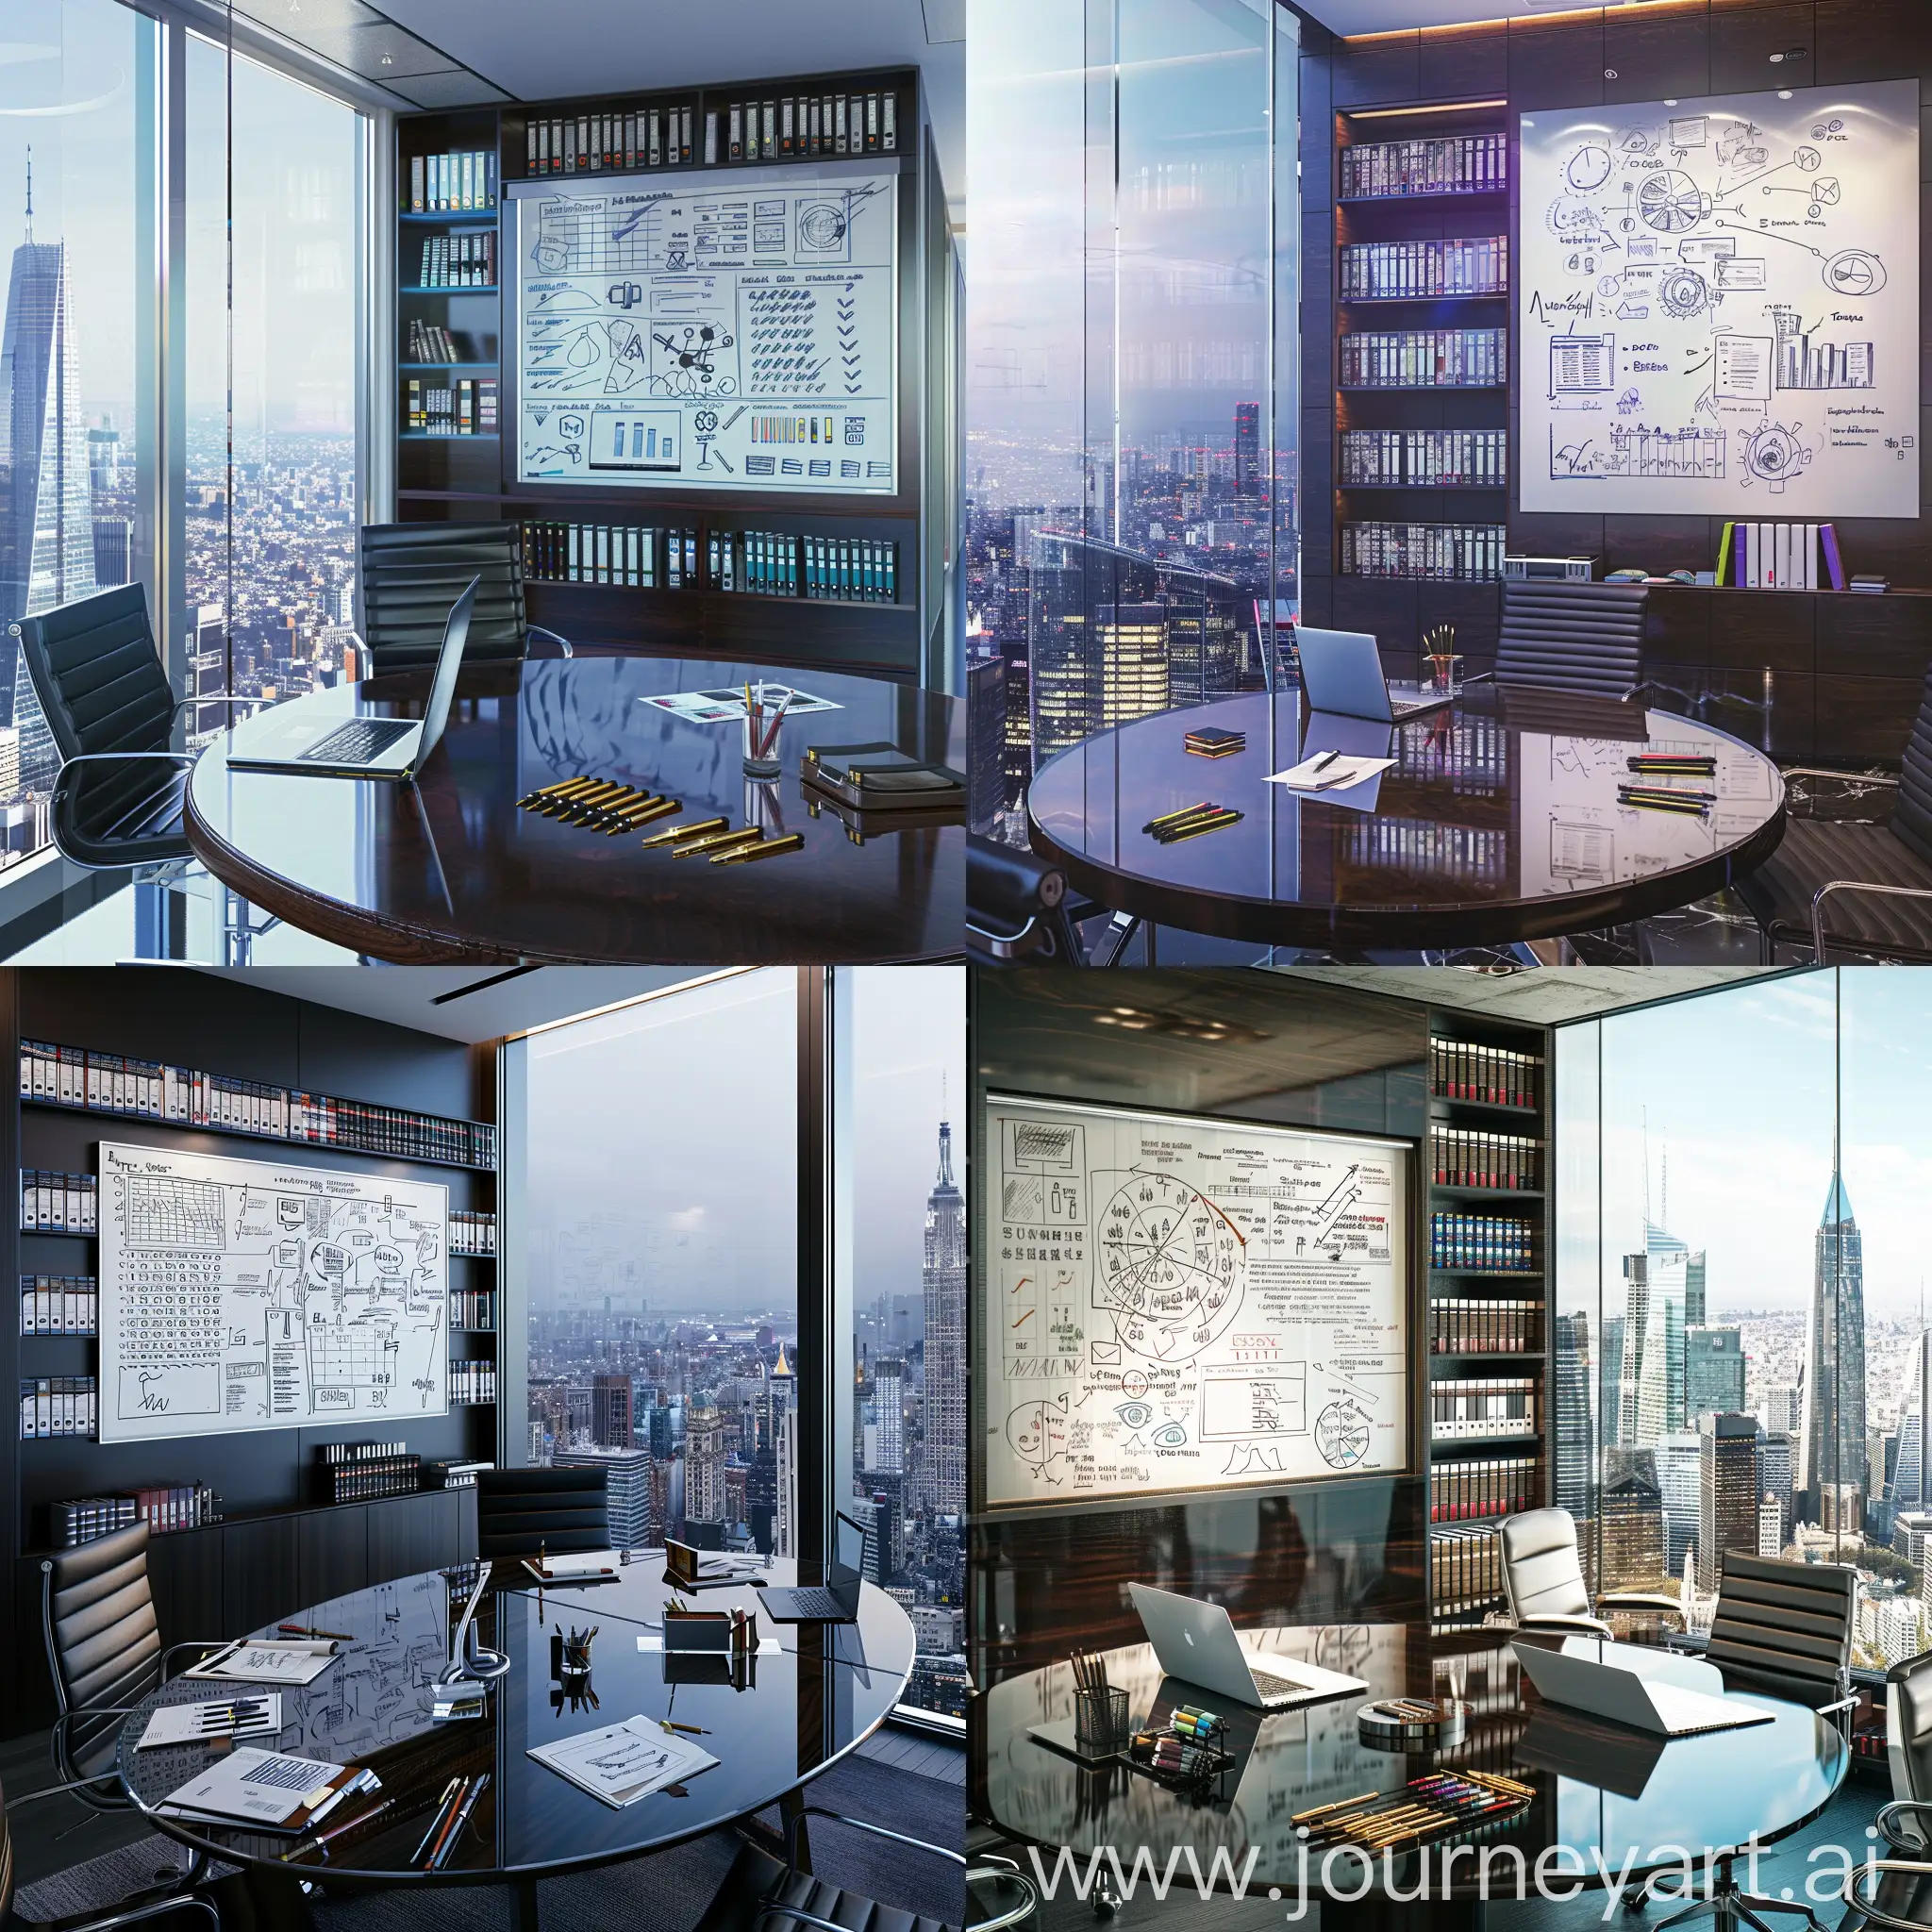 Executive-Office-with-City-View-Modern-Desk-and-Business-Strategy-Whiteboard